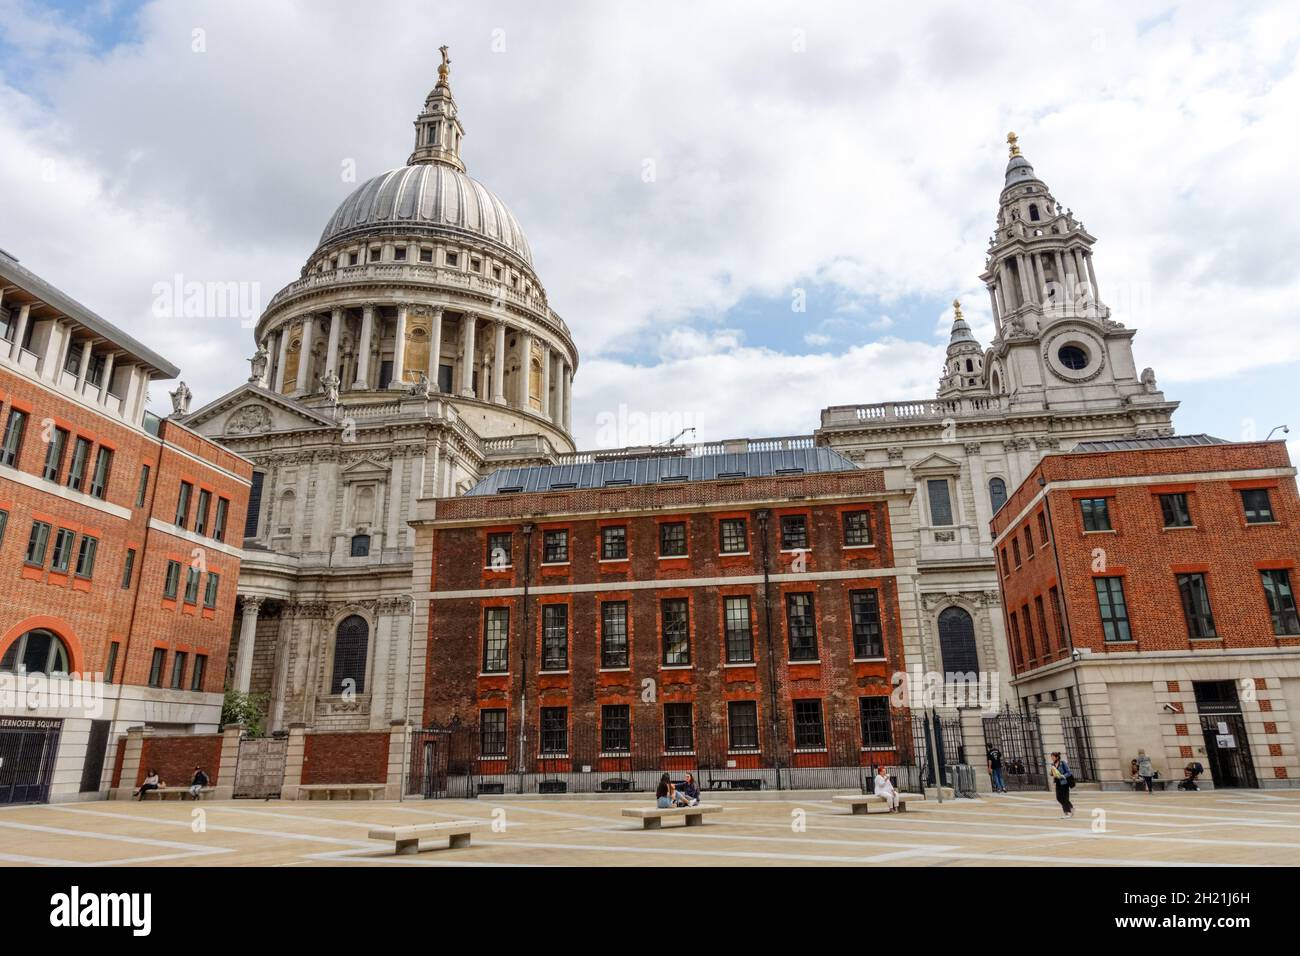 St Paul's Cathedral seen from Paternoster Square, London England United Kingdom UK Stock Photo